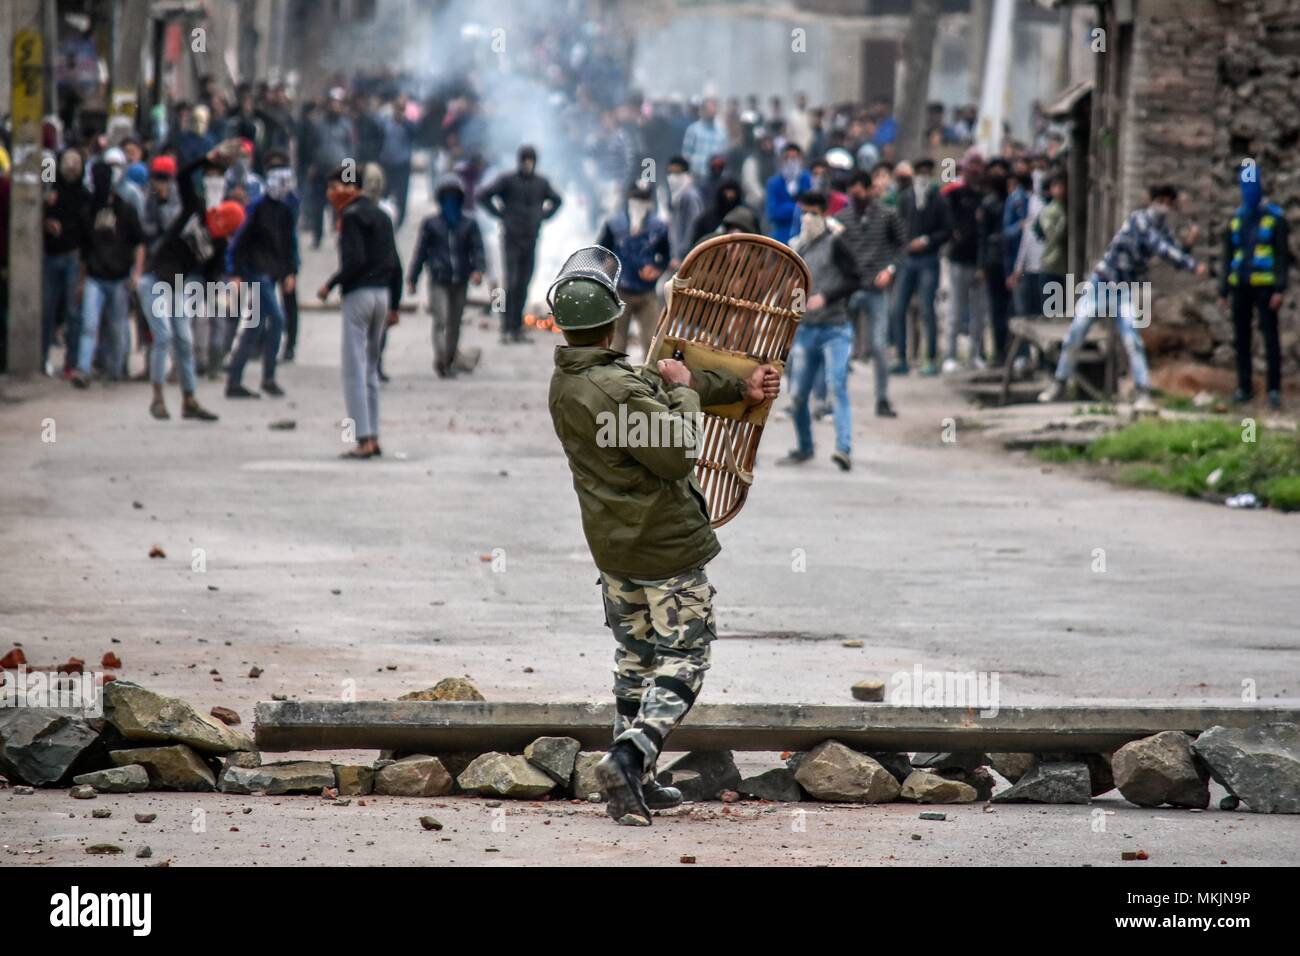 Srinagar, Kashmir. 8th May 2018. An paramilitary trooper shields himself from stones hurled by Kashmiri demonstrators during clashes in Srinagar, Kashmir. Fierce clashes broke out between government forces and Kashmiri protesters in Srinagar on Tuesday as the valley continued to remain tense over the killing of 11 people including 5 militants and 6 civilians in Kashmir. Police used tear smoke shells and shot gun pellets to disperse hundreds of demonstrators who hurled rocks and chanted anti-and pro-freedom slogans. Credit: SOPA Images Limited/Alamy Live News Stock Photo